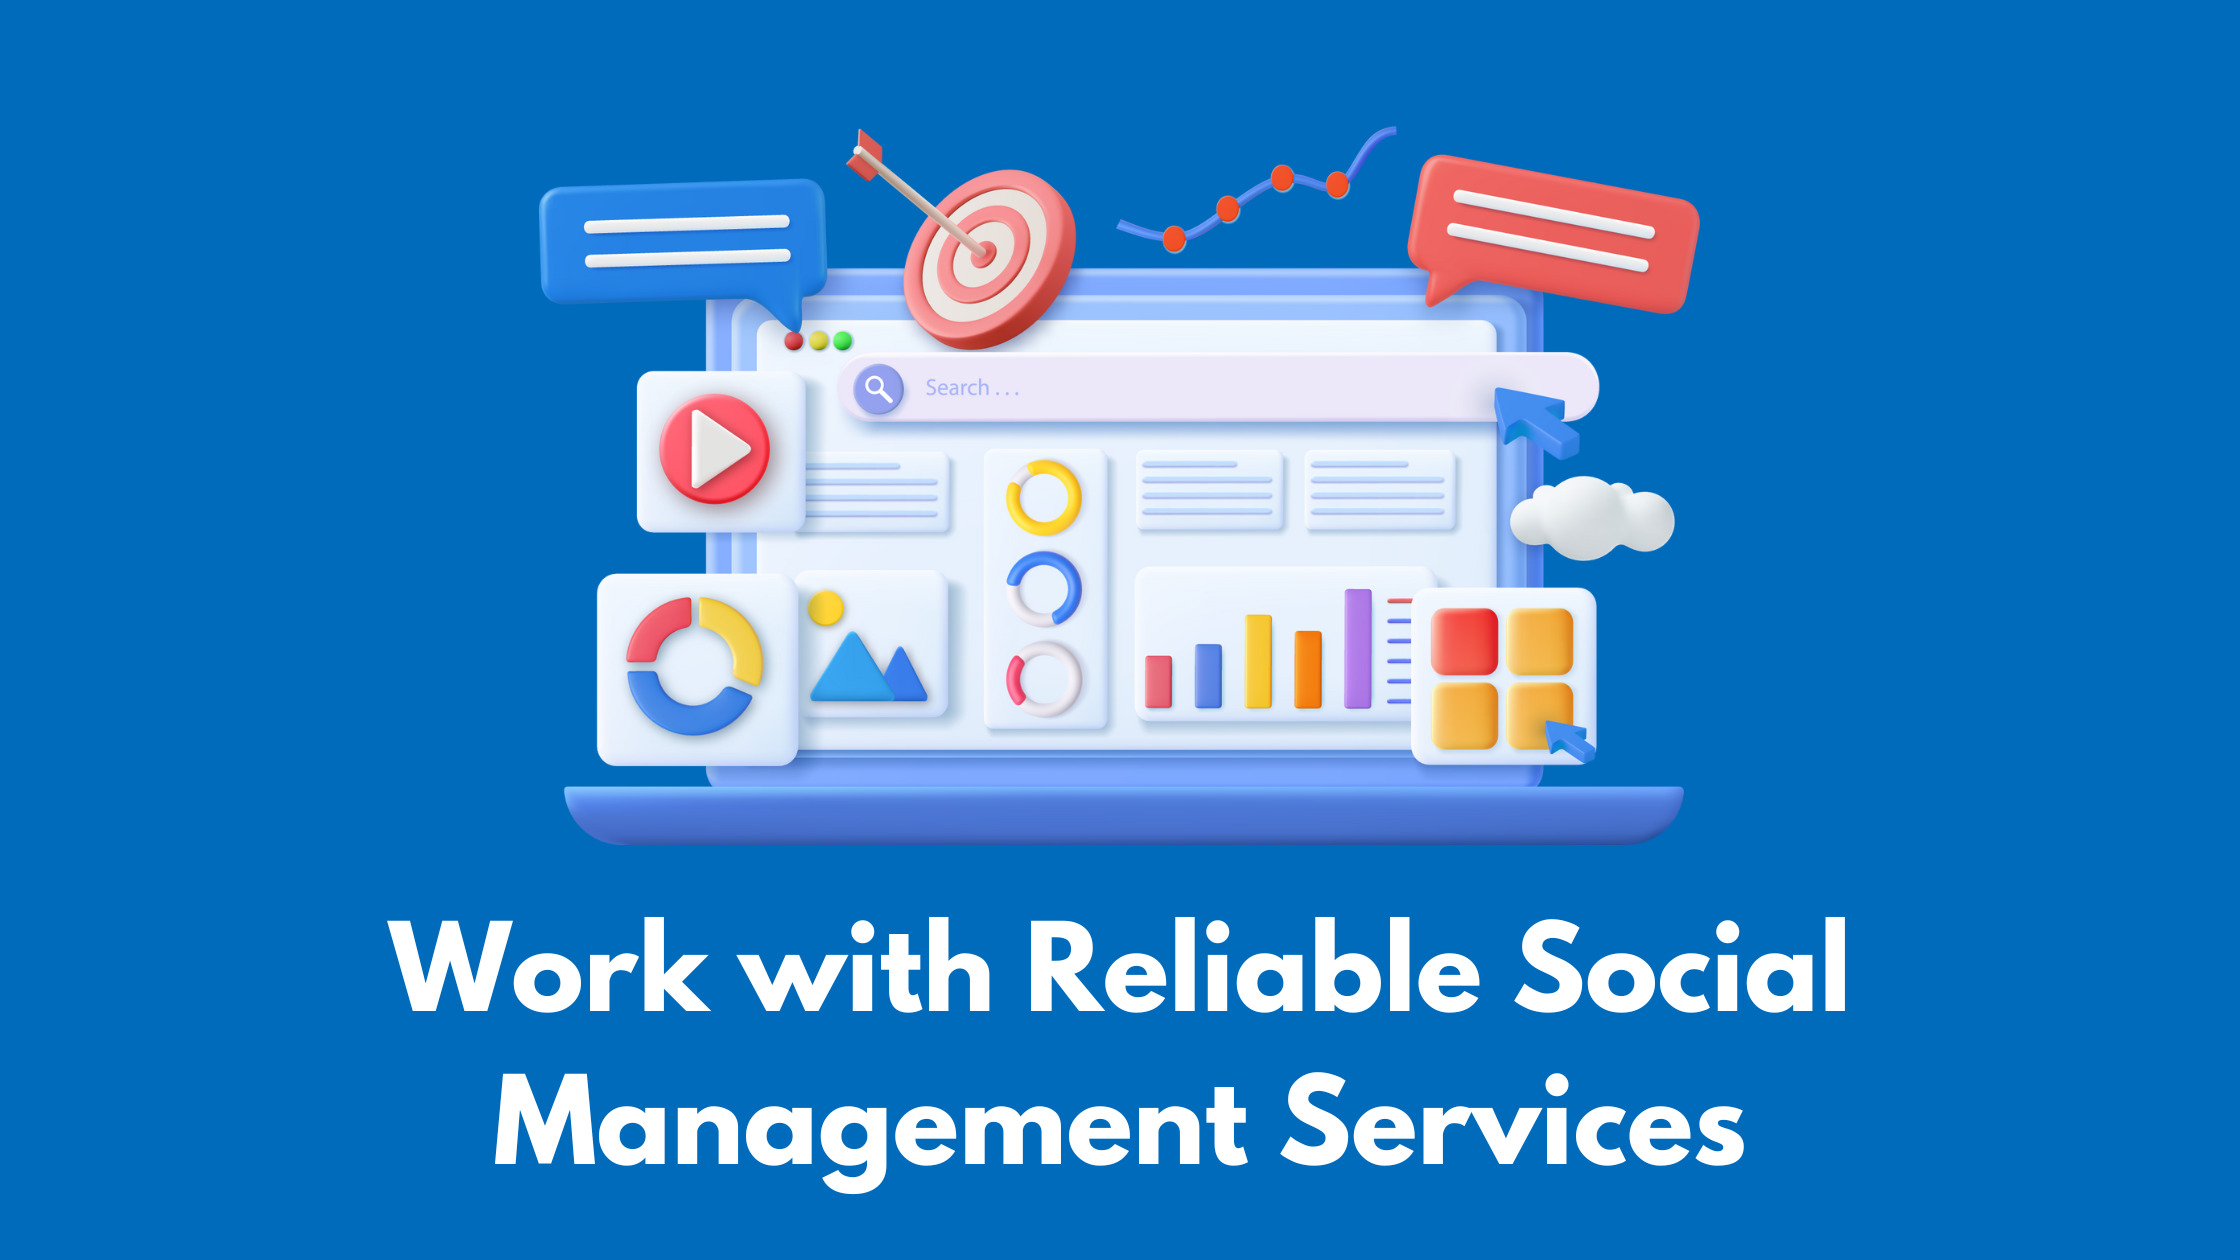 Work with Reliable Social Management Services